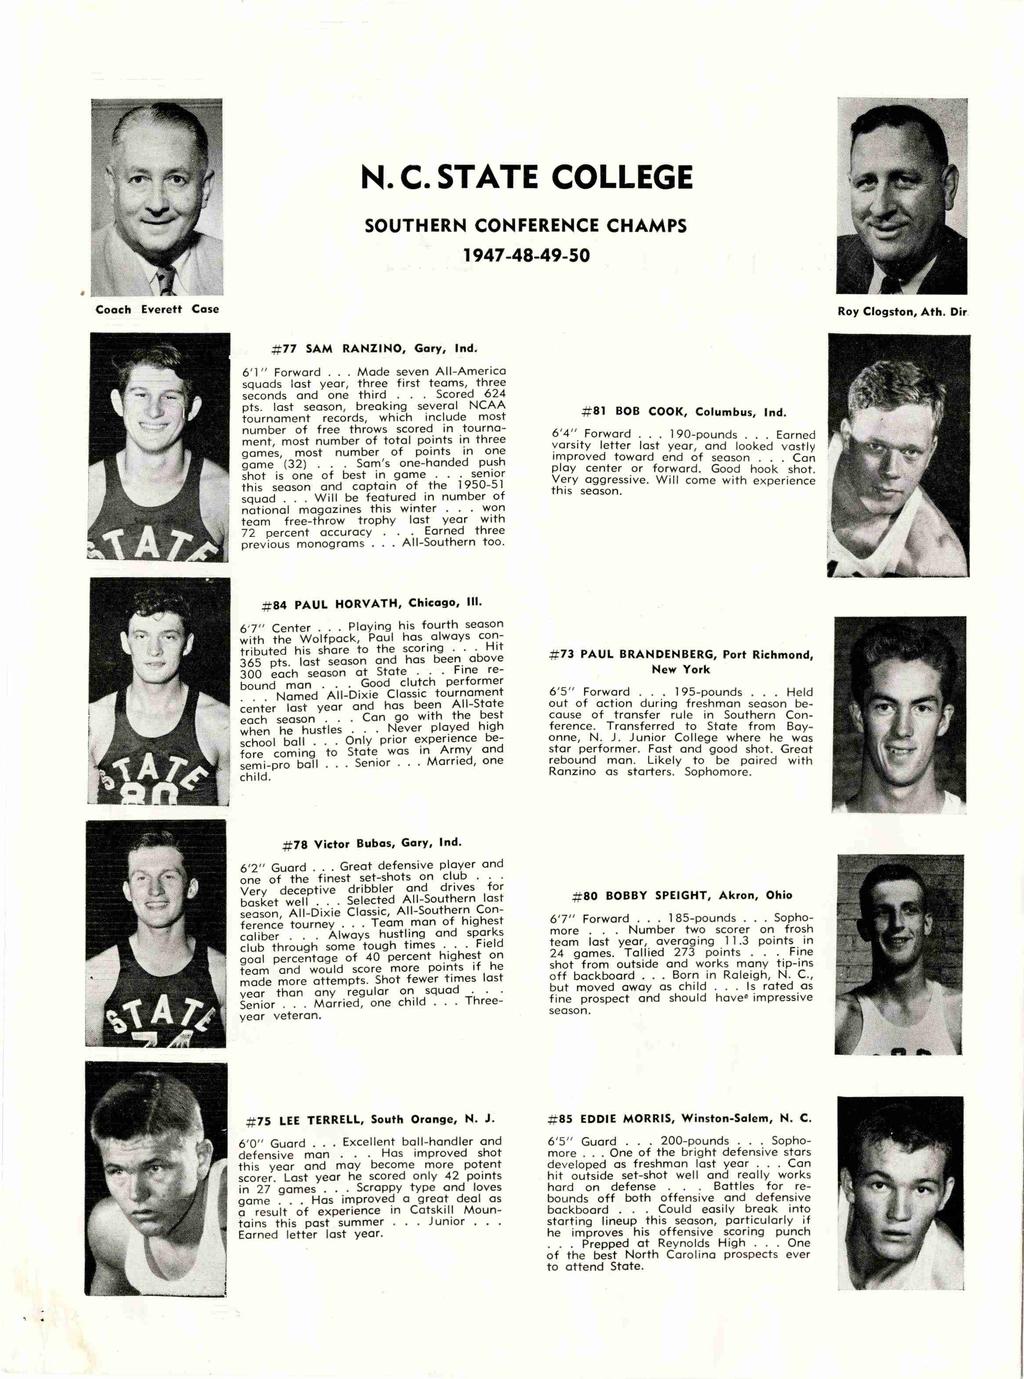 N. C. STATE COLLEGE SOUTHERN CONFERENCE CHAMPS 1947-48-49-50 Roy Clogston, Ath. Dir, #77 SAM RANZINO, Gary, Ind. 6 1 Forward.